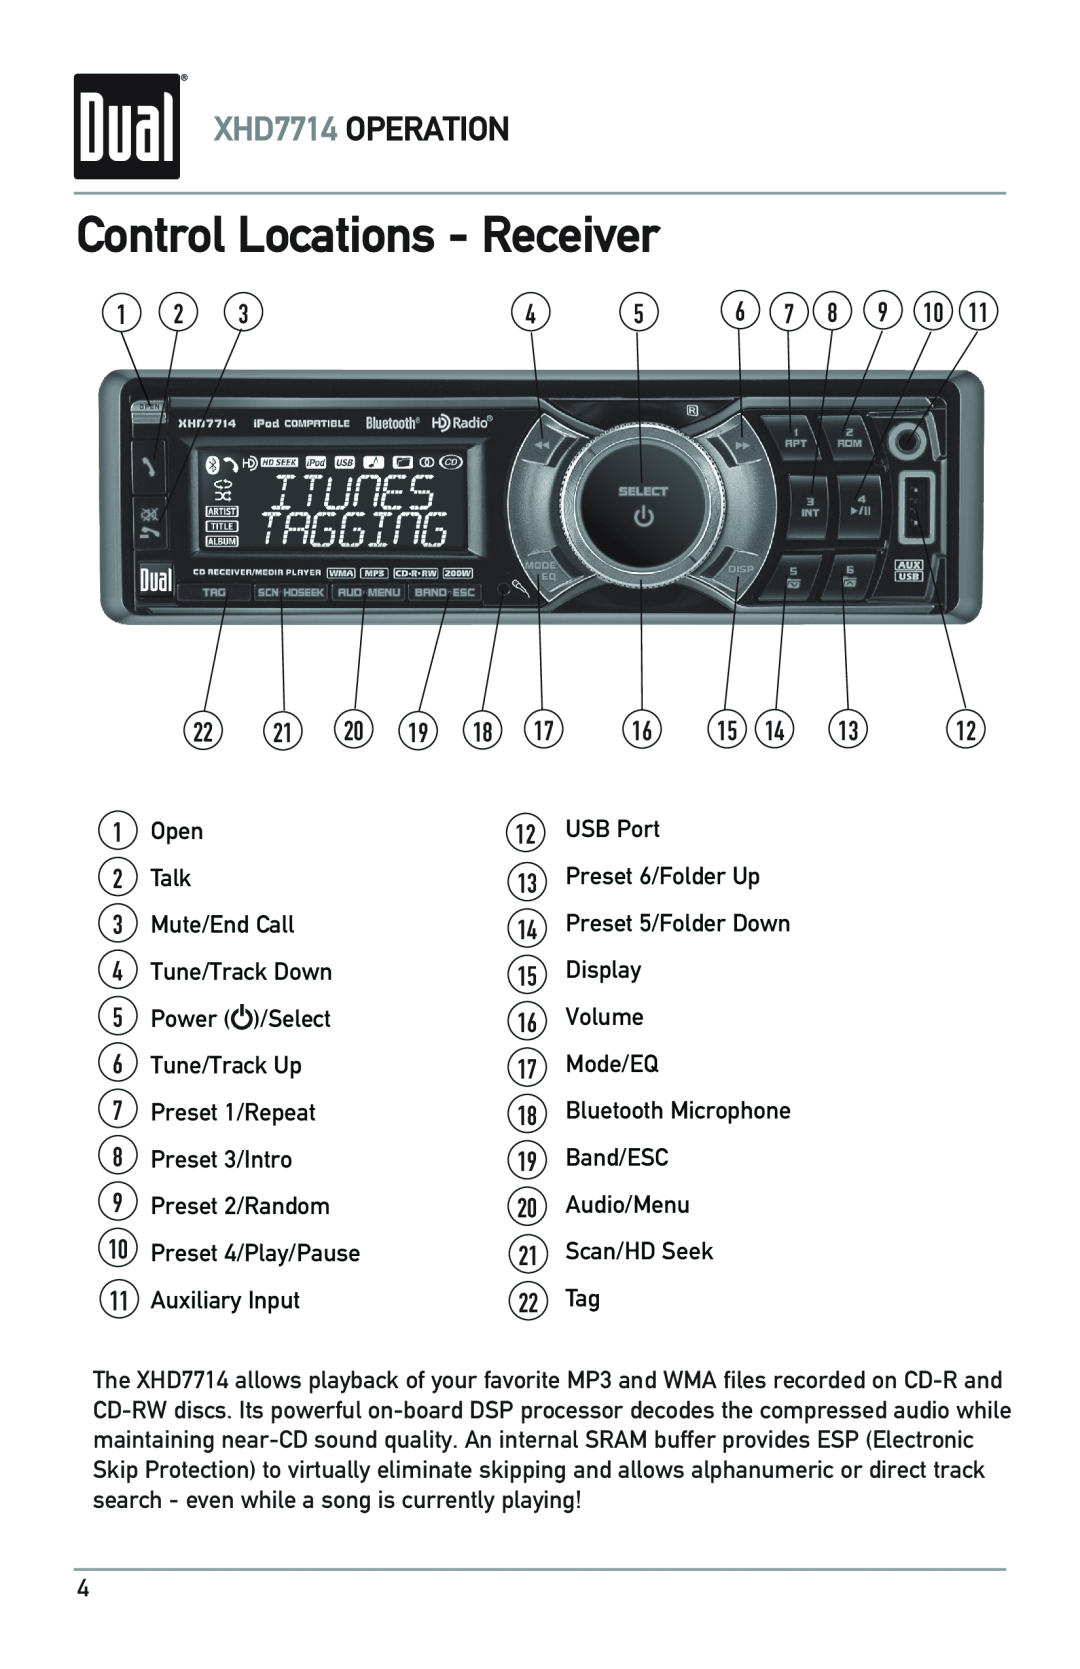 Dual owner manual Control Locations - Receiver, XHD7714 OPERATION 